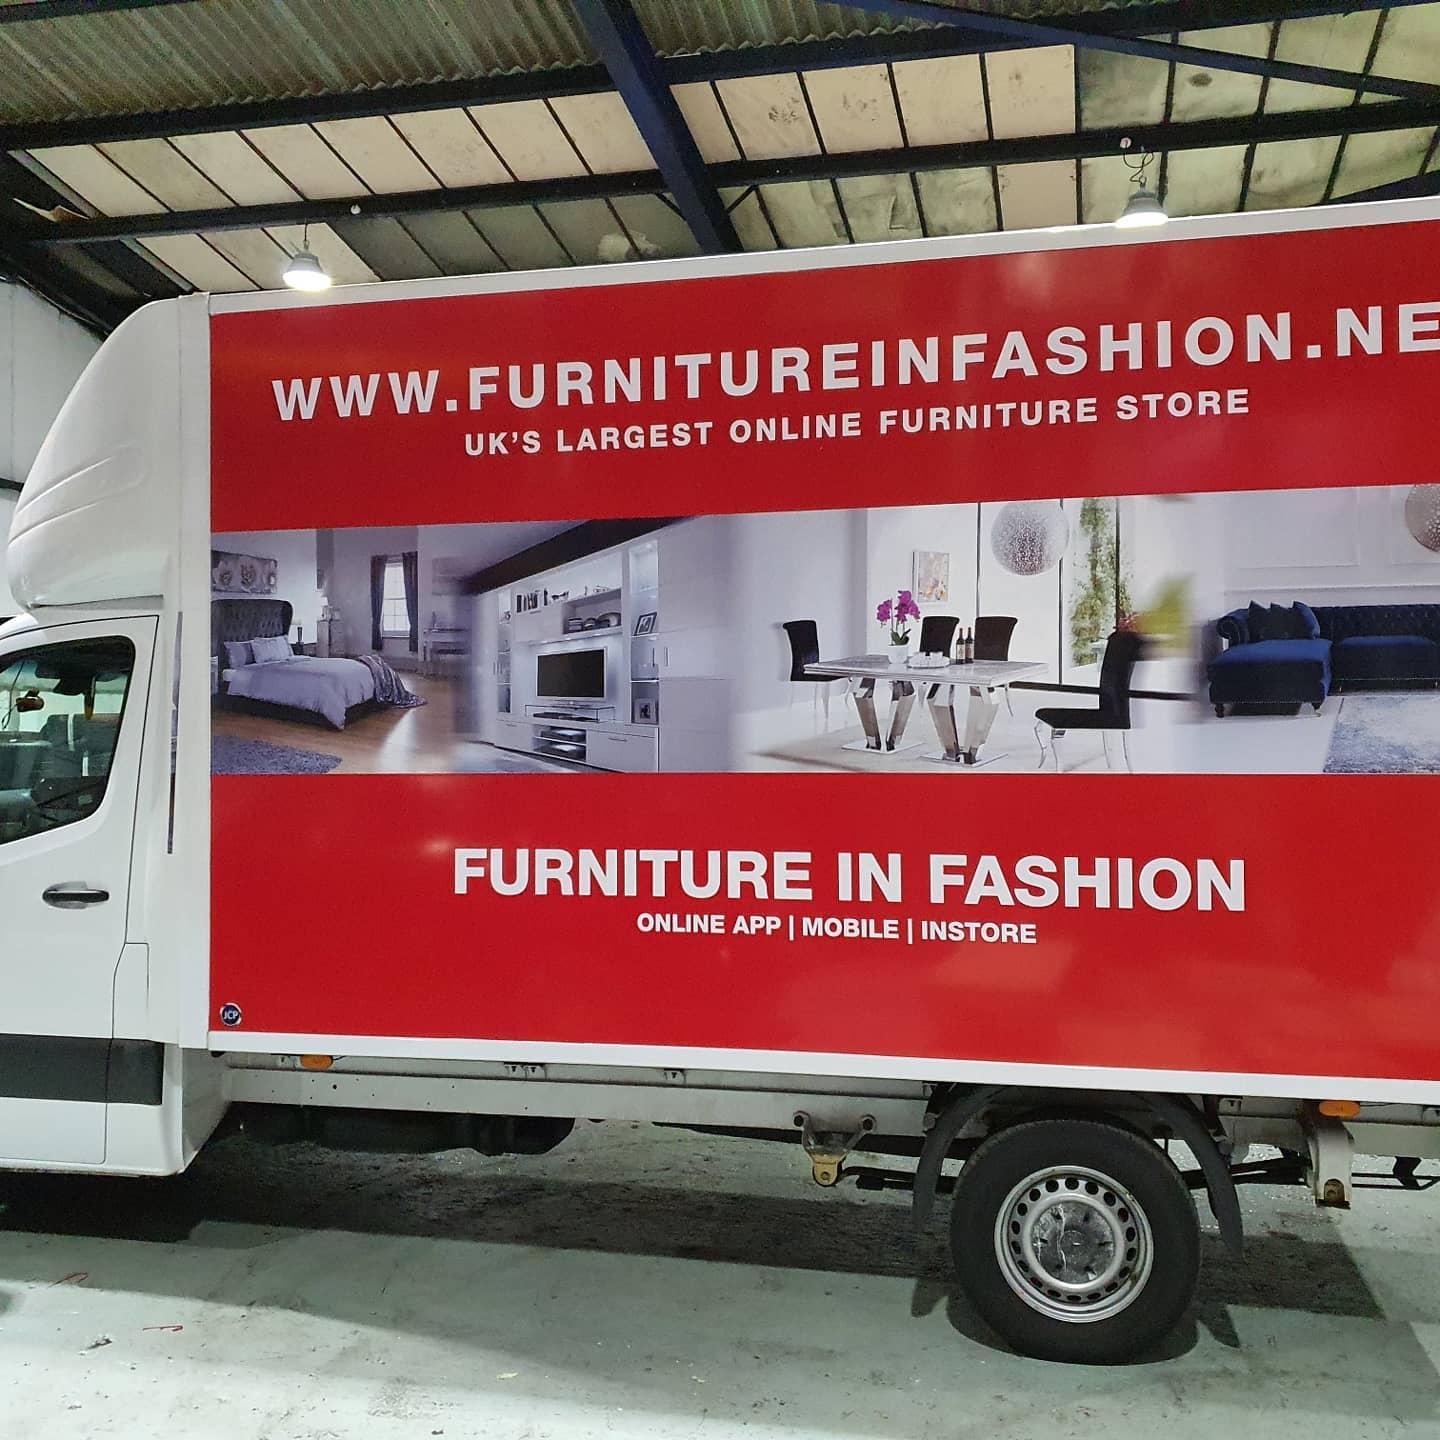 Luton box Van wrapped for @furnitureinfashion

To place an order for vechile livery, If at all possible PLEASE whatsapp me on 07702153393